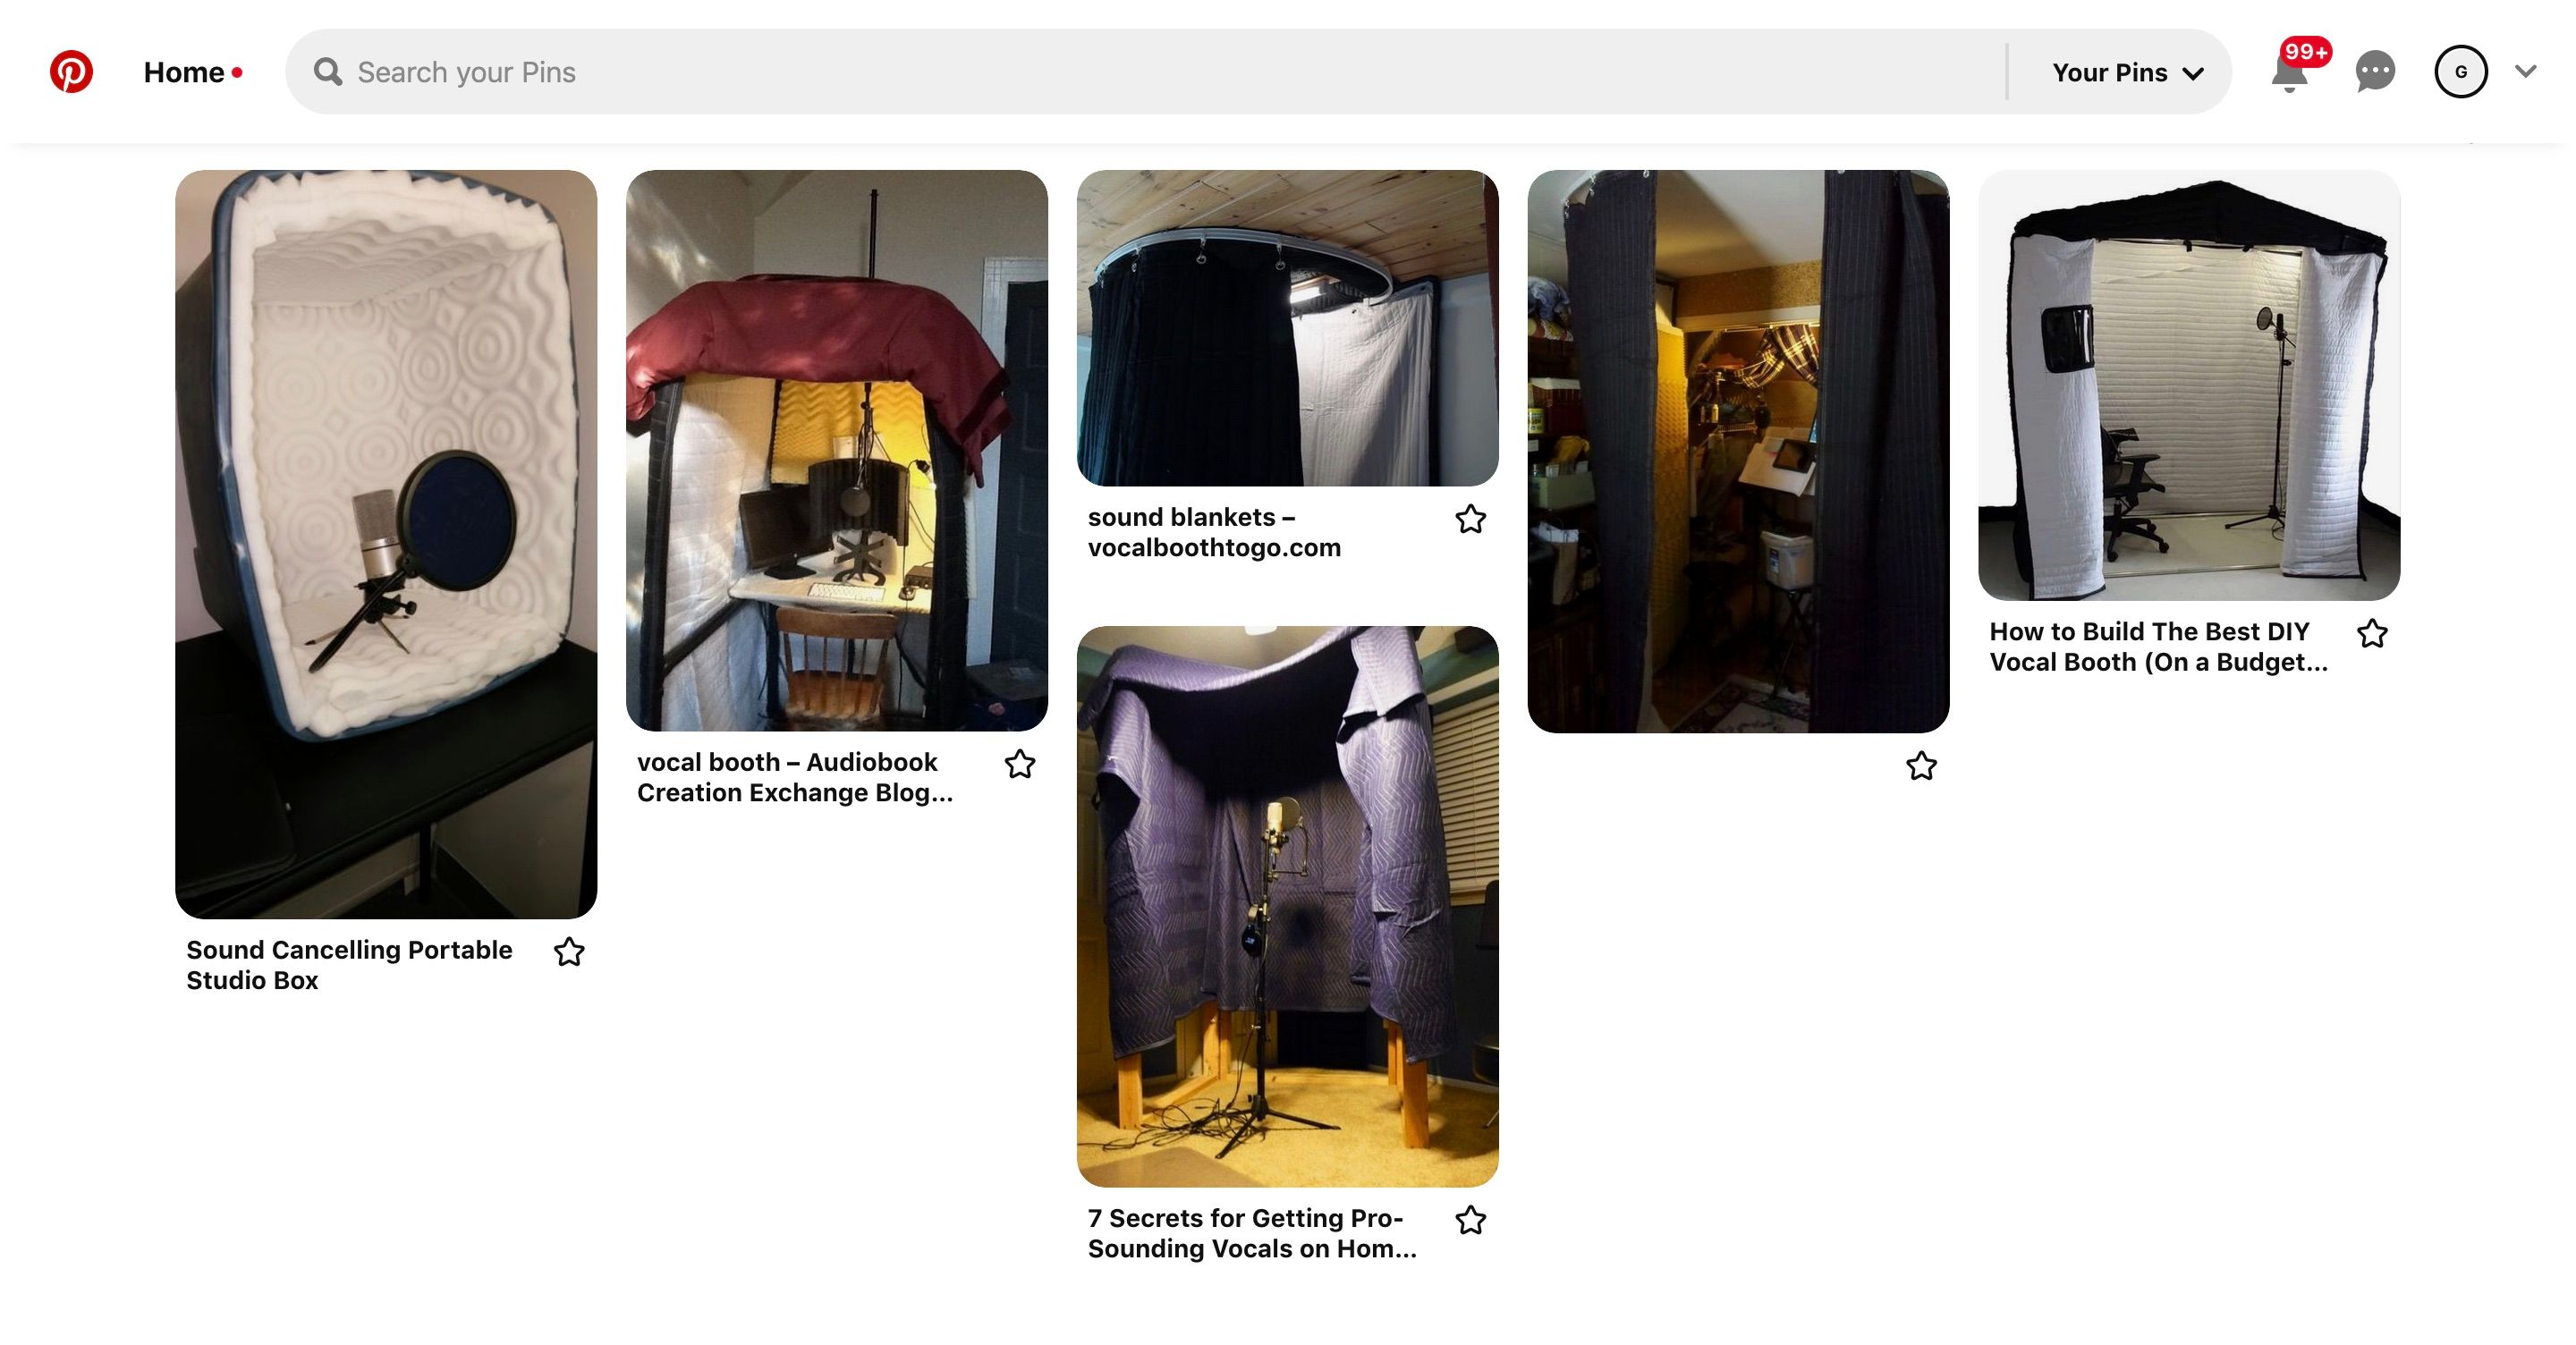 A screenshot from the website Pinterest showing different images of DIY recording booths made with blankets